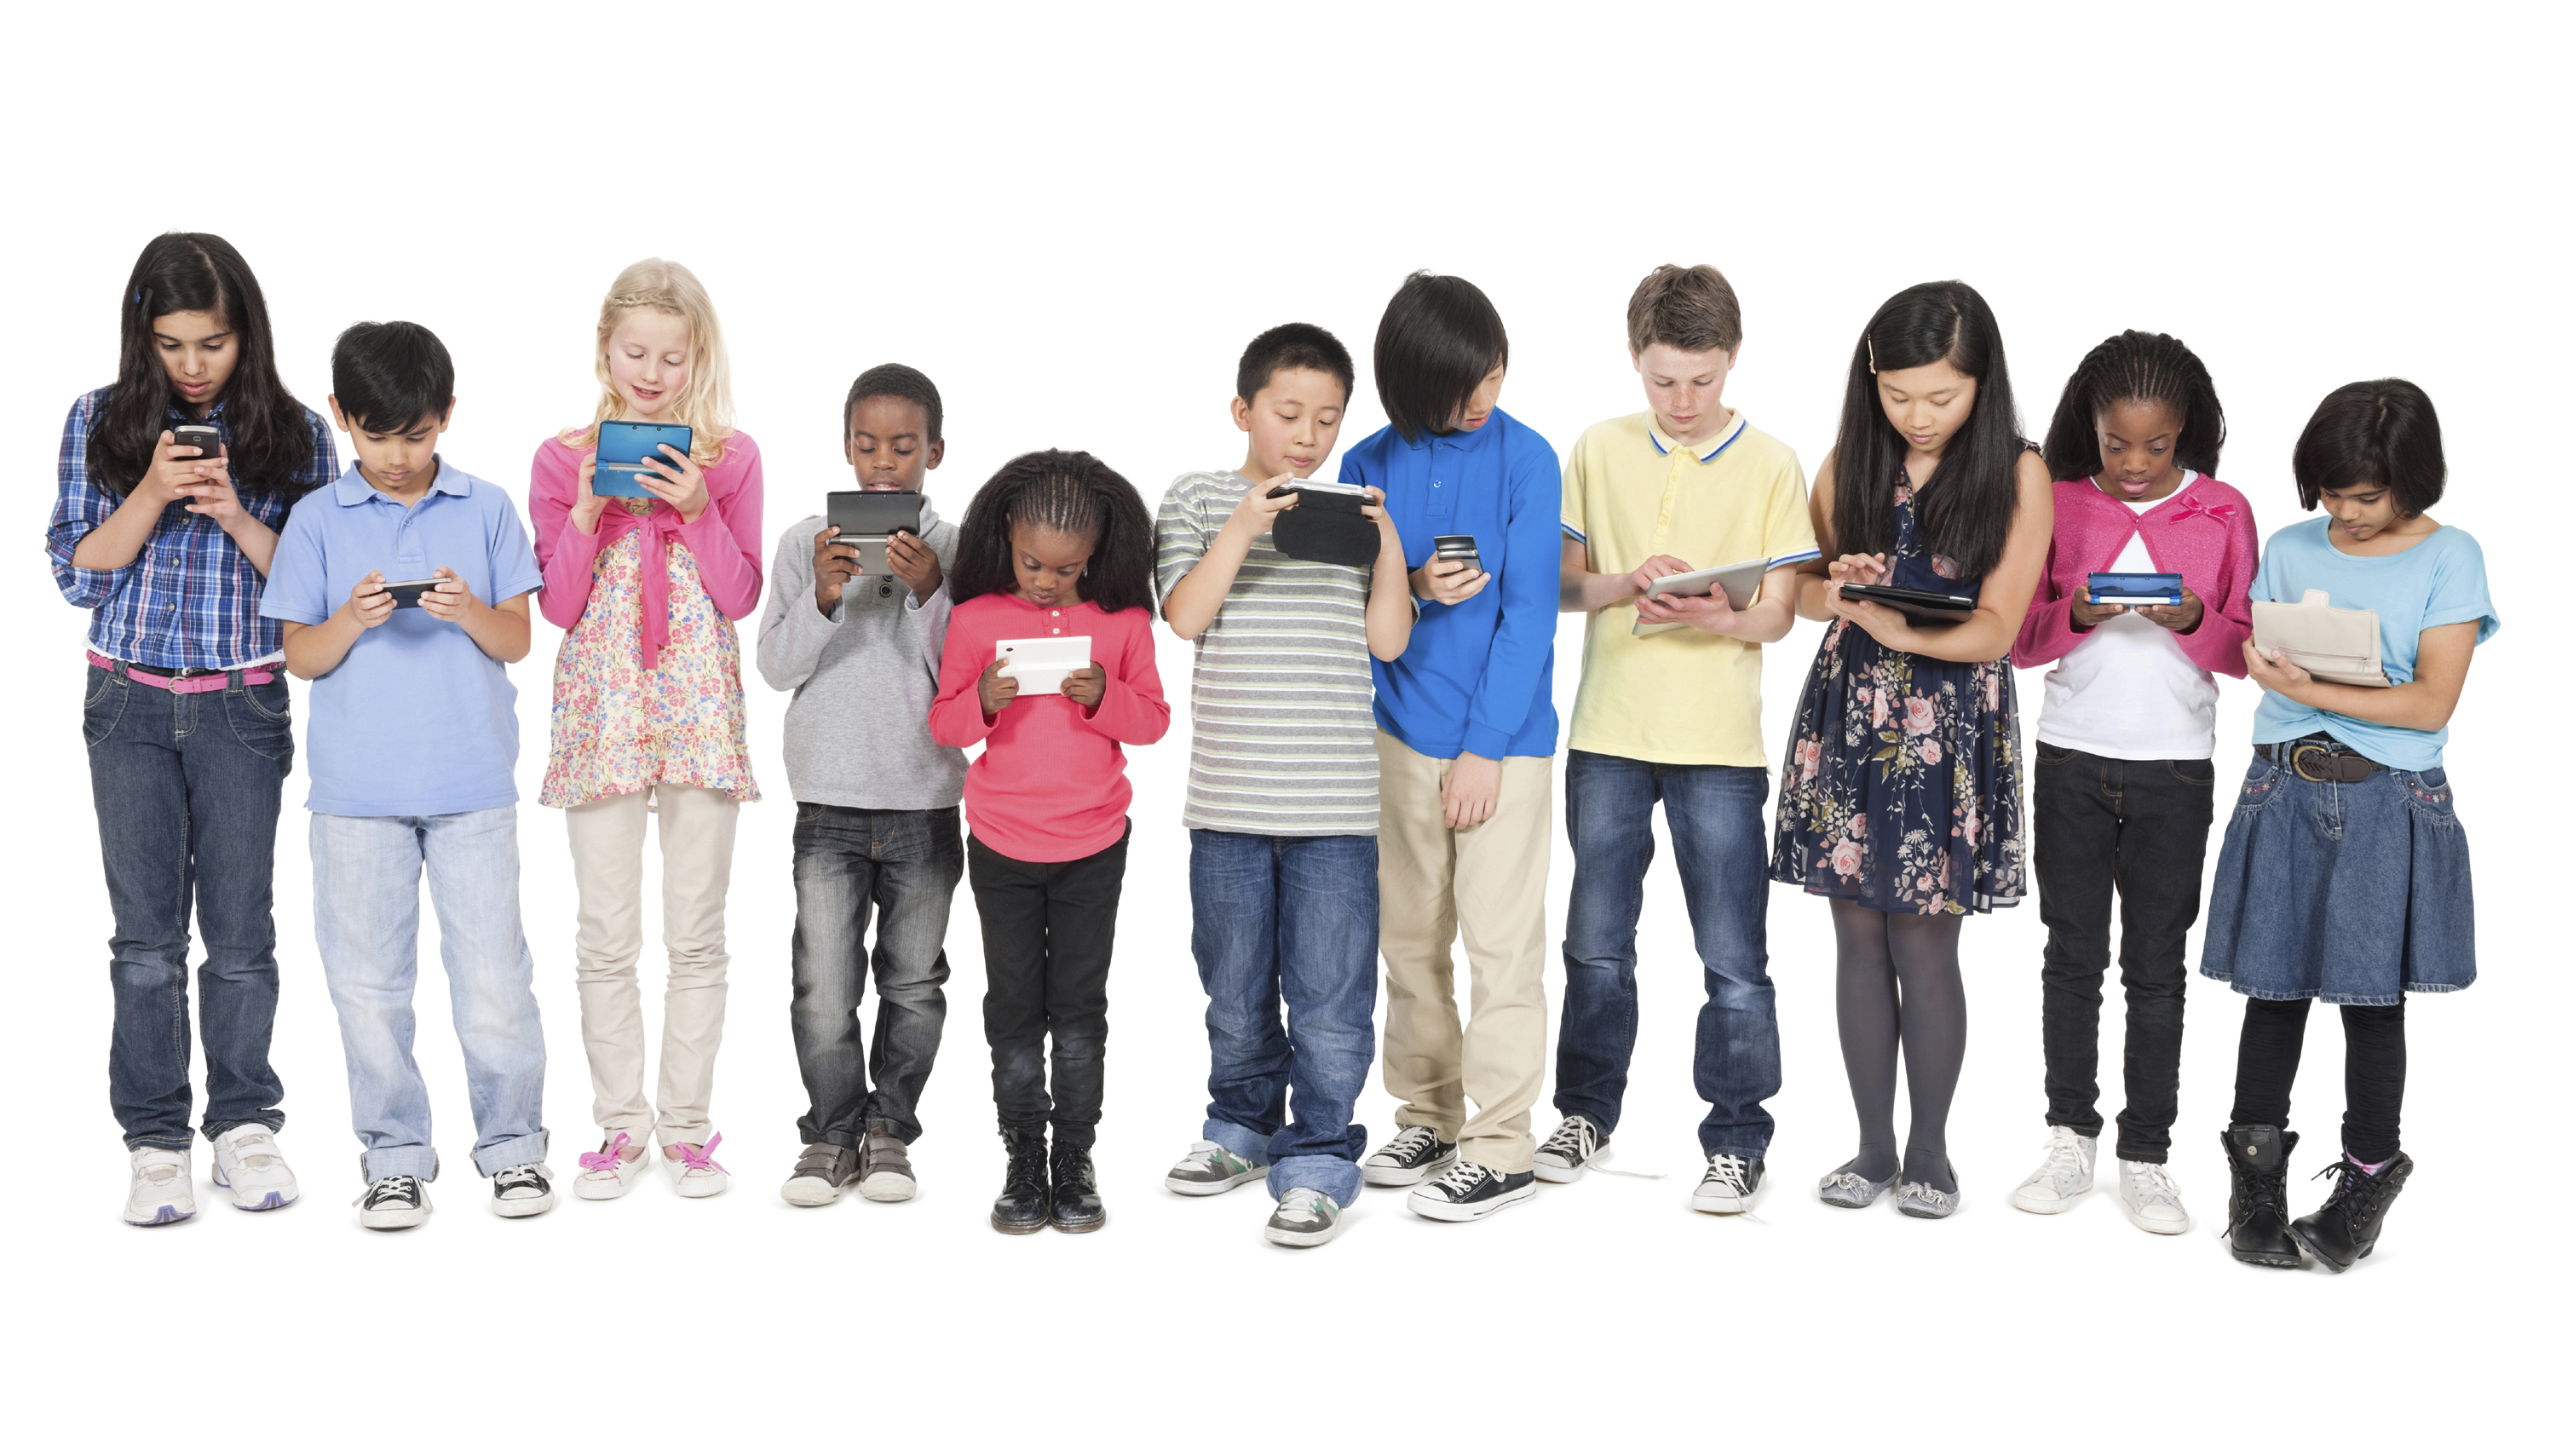 Children & Technology: Parenting Tips for the Digital Age